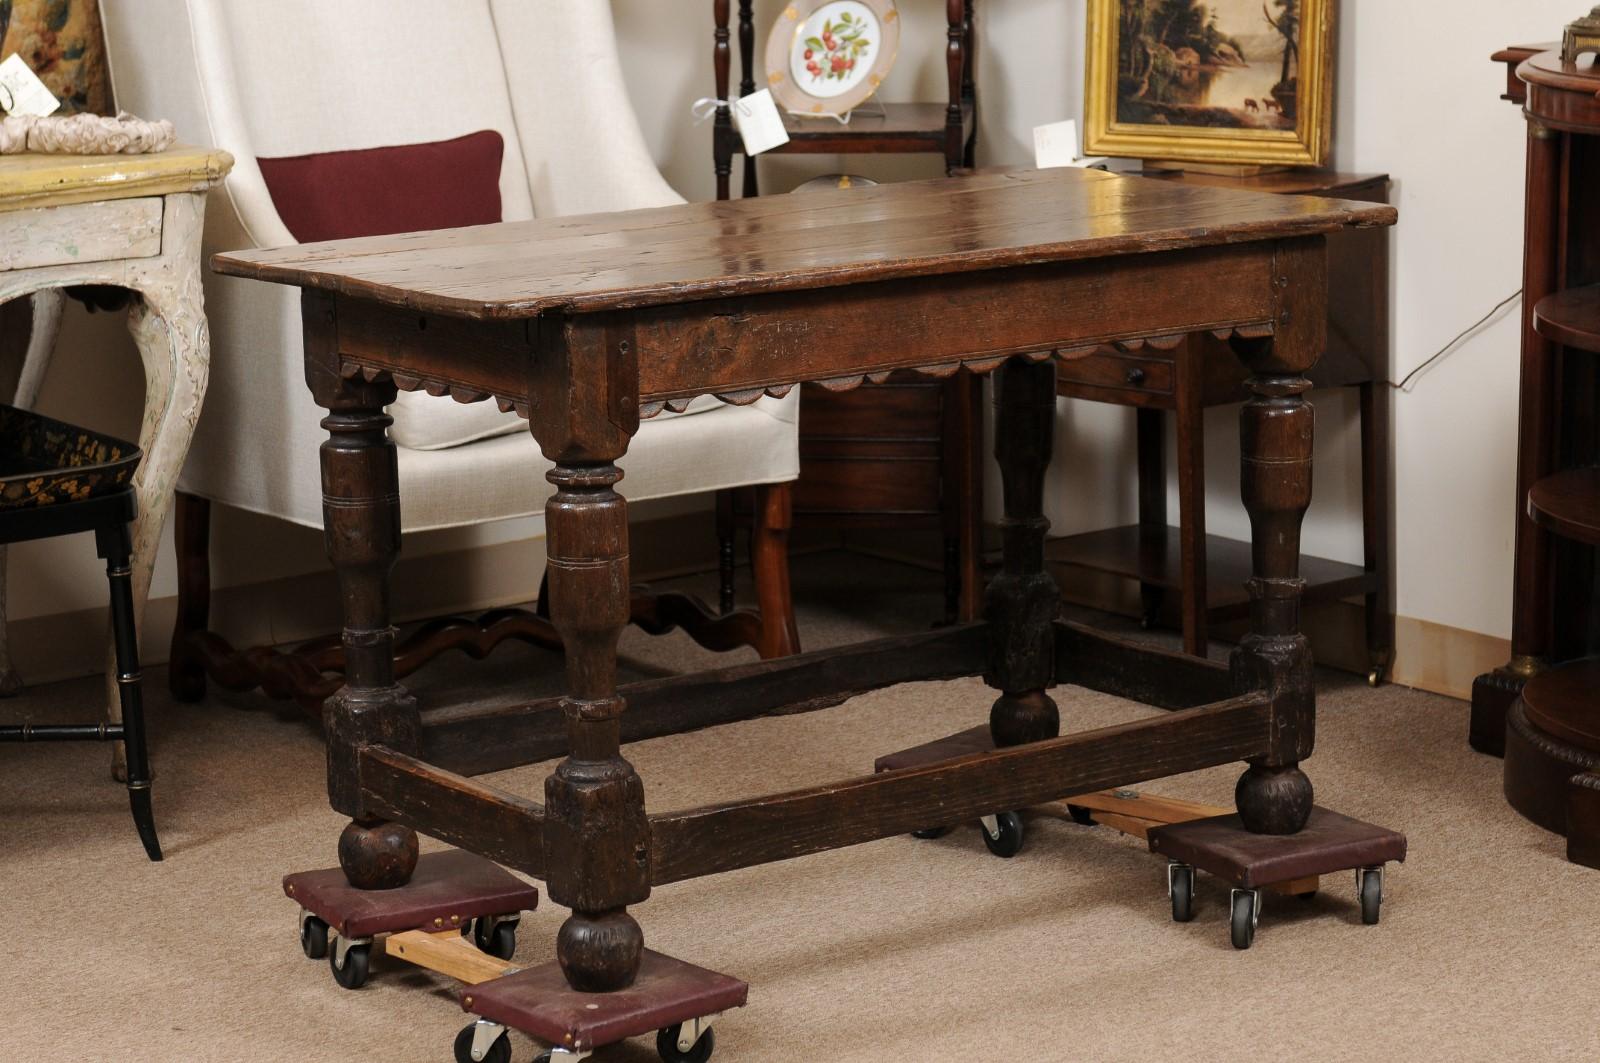 Early 18th Century Oak Console Table with Carved Apron, Turned Legs, & Box Stretcher. Finished on All Sides.